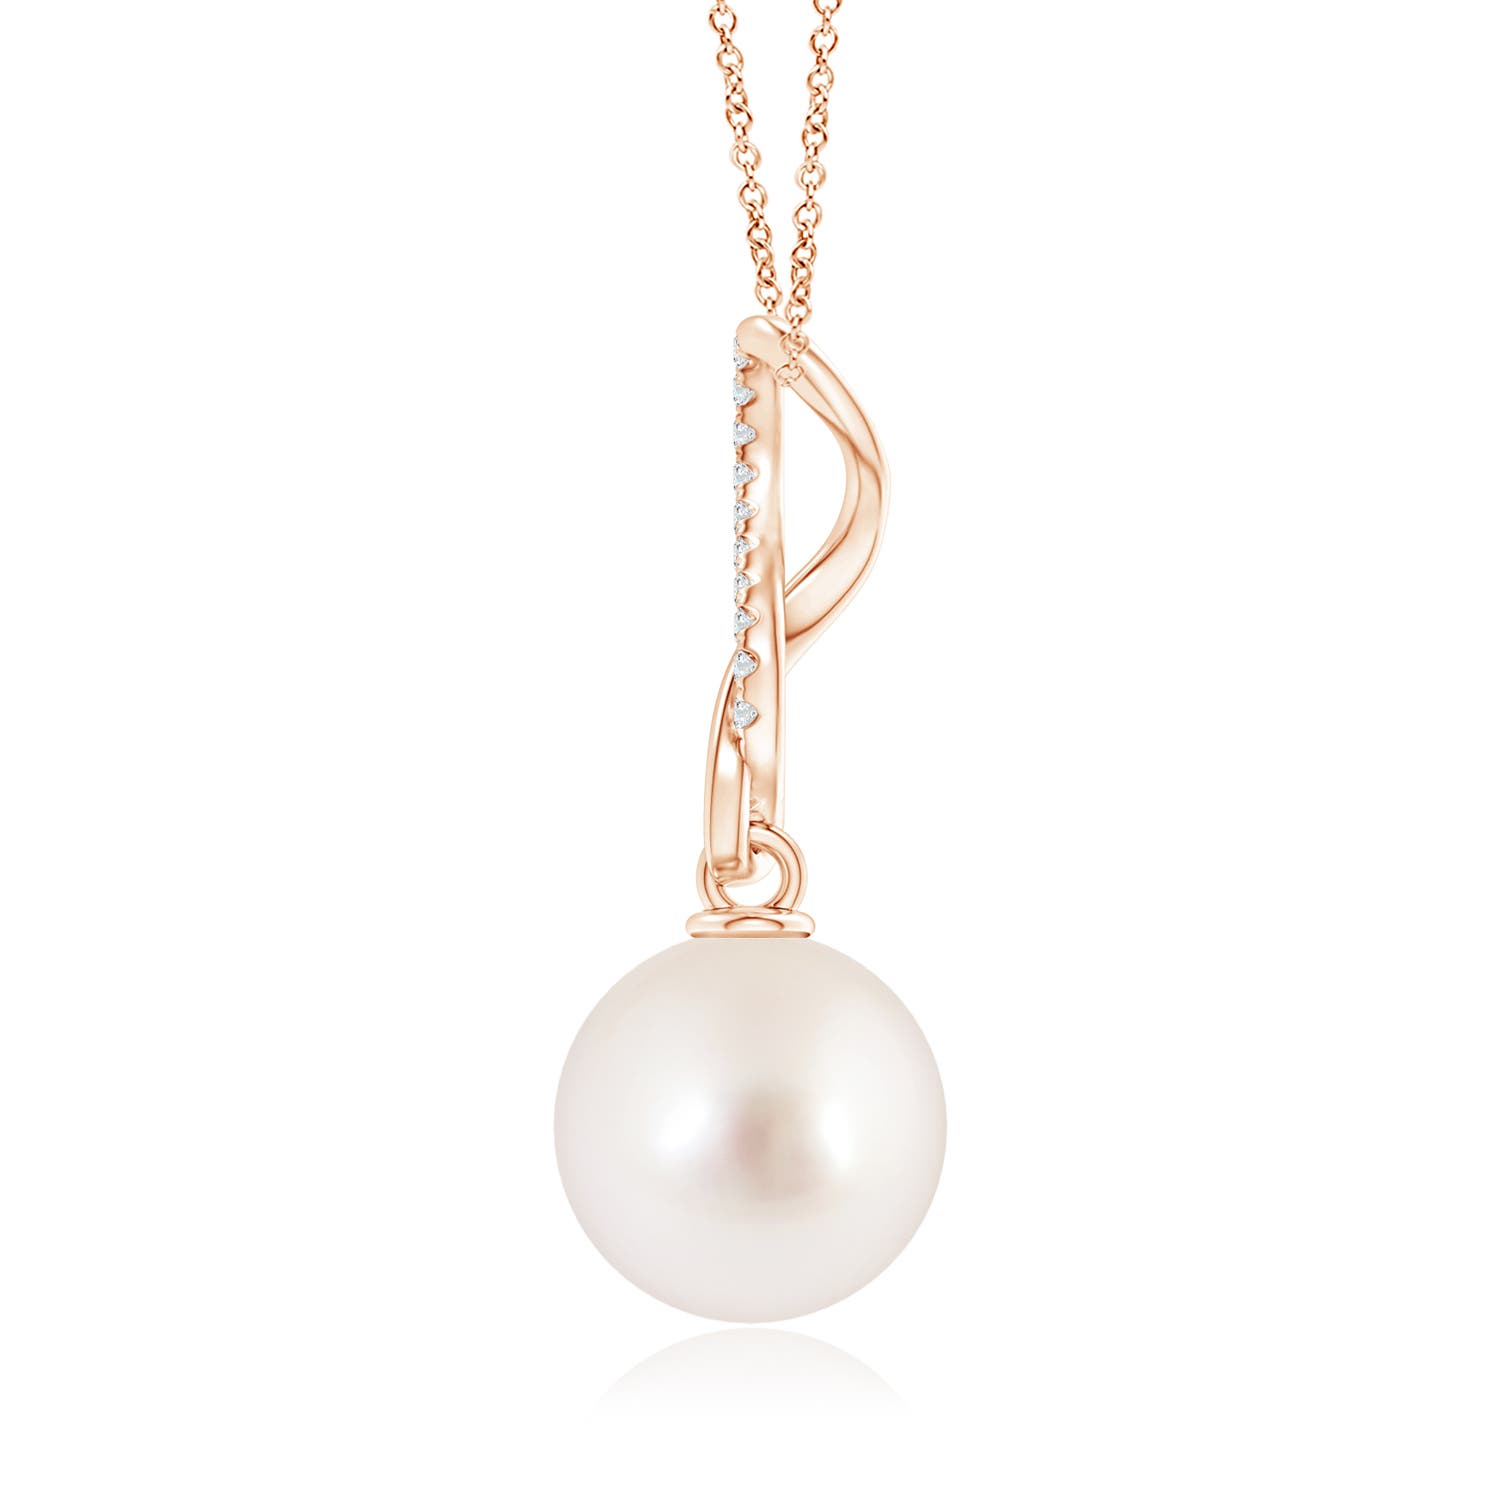 AAAA - South Sea Cultured Pearl / 7.26 CT / 14 KT Rose Gold